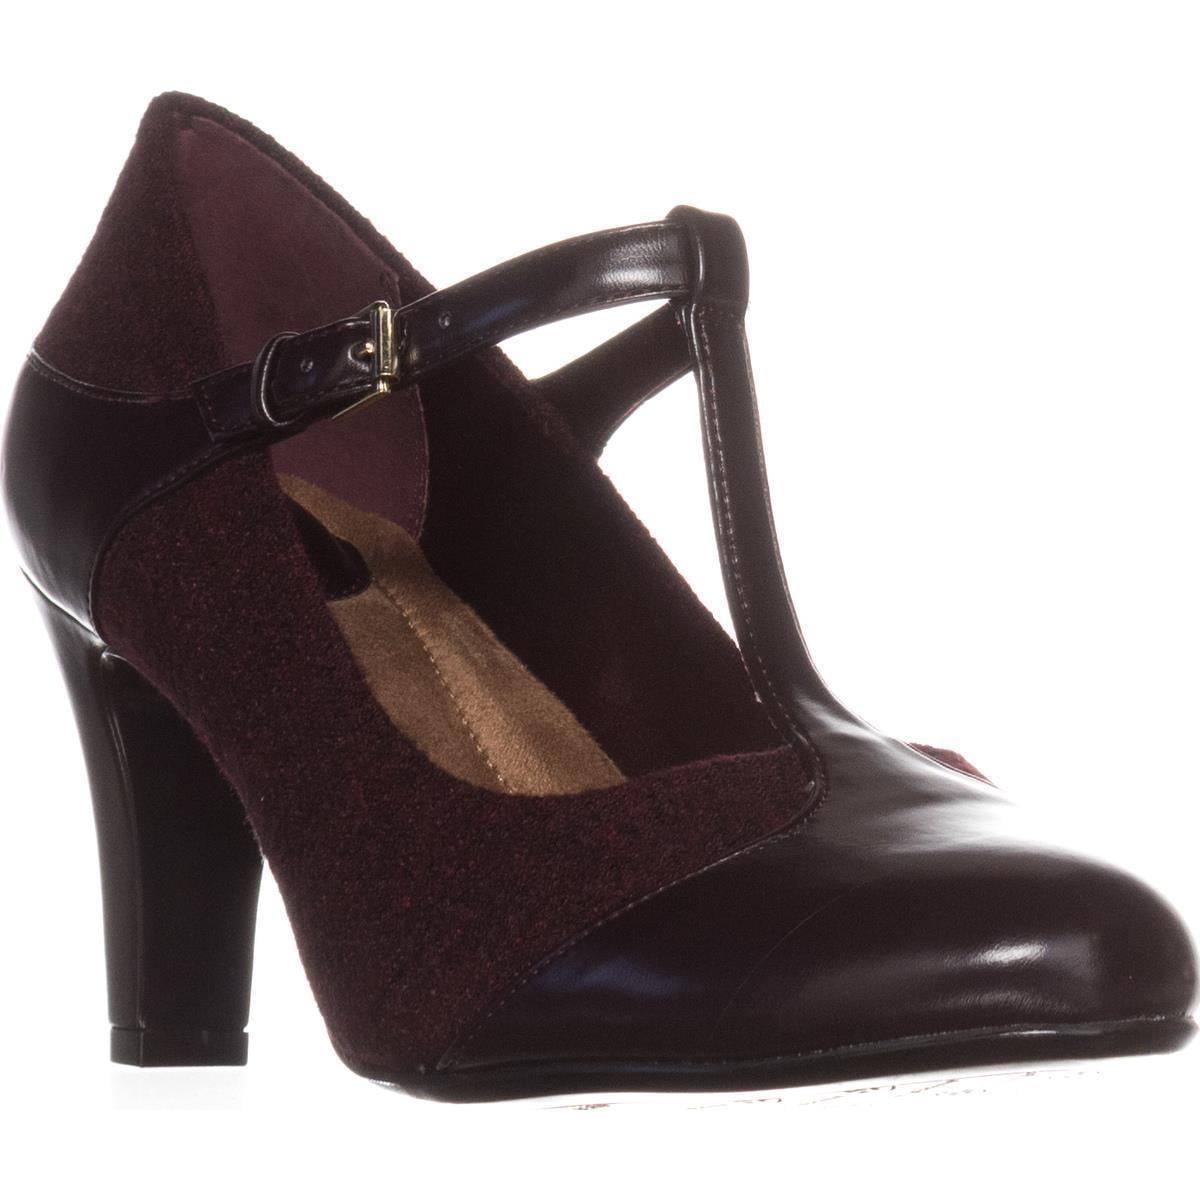 oxblood mary janes